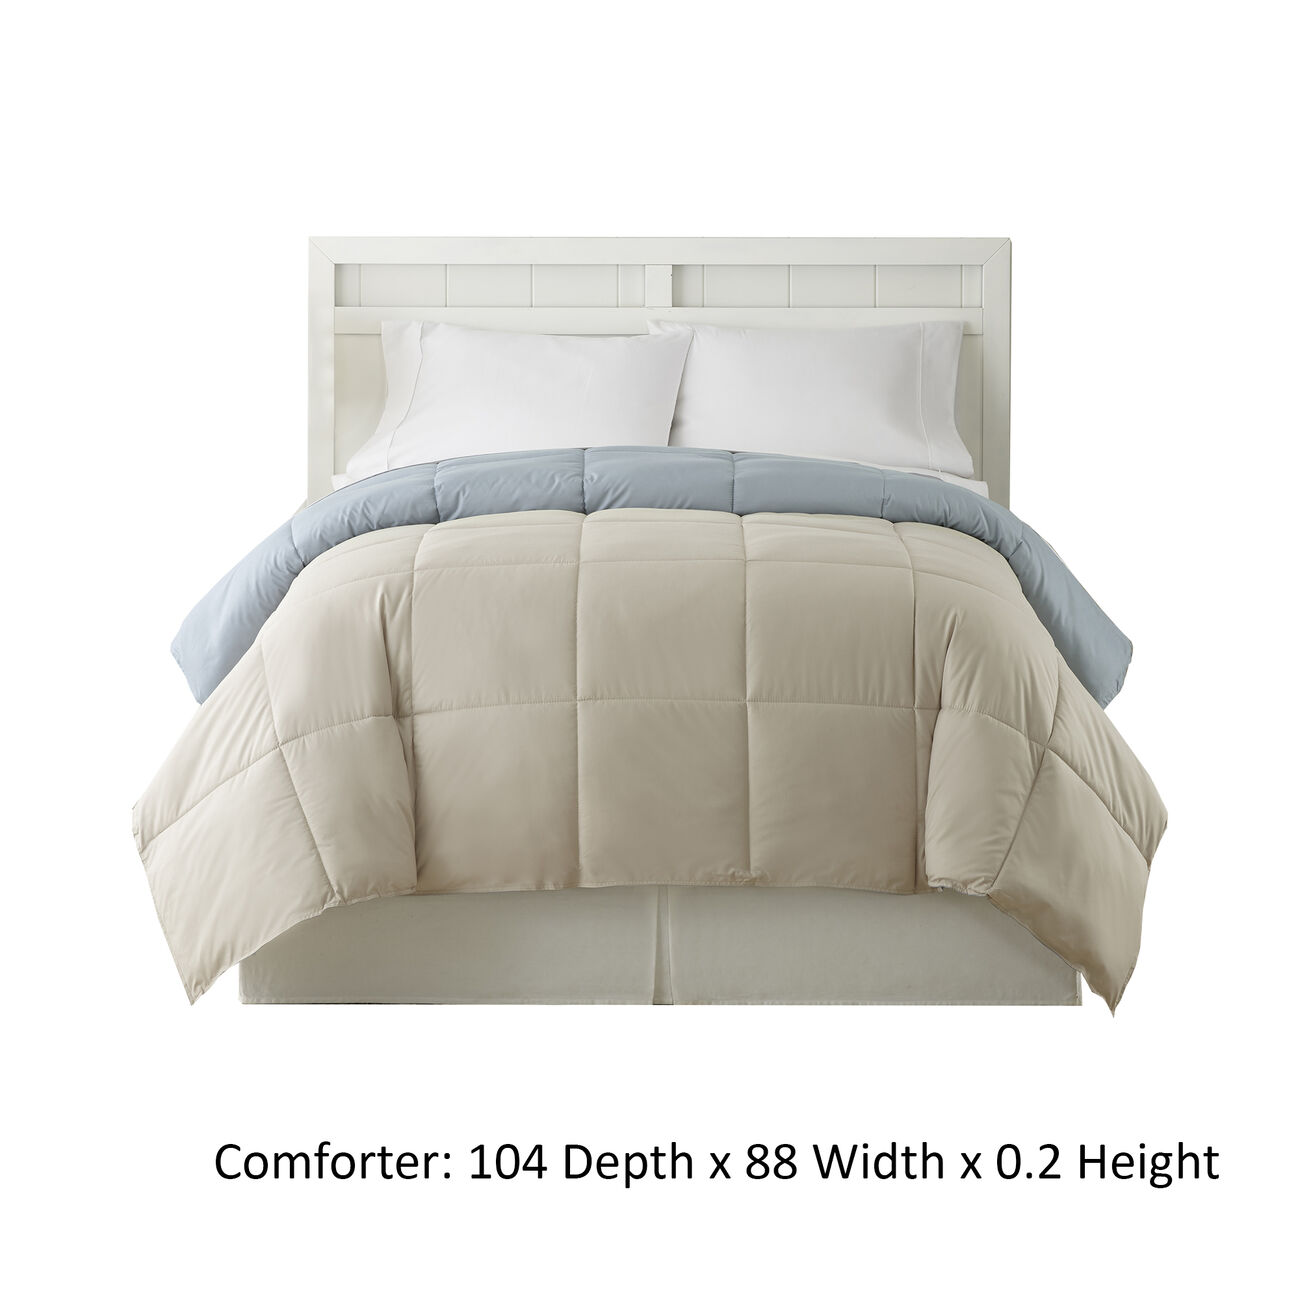 Genoa King Size Box Quilted Reversible Comforter The Urban Port, Gray and Blue